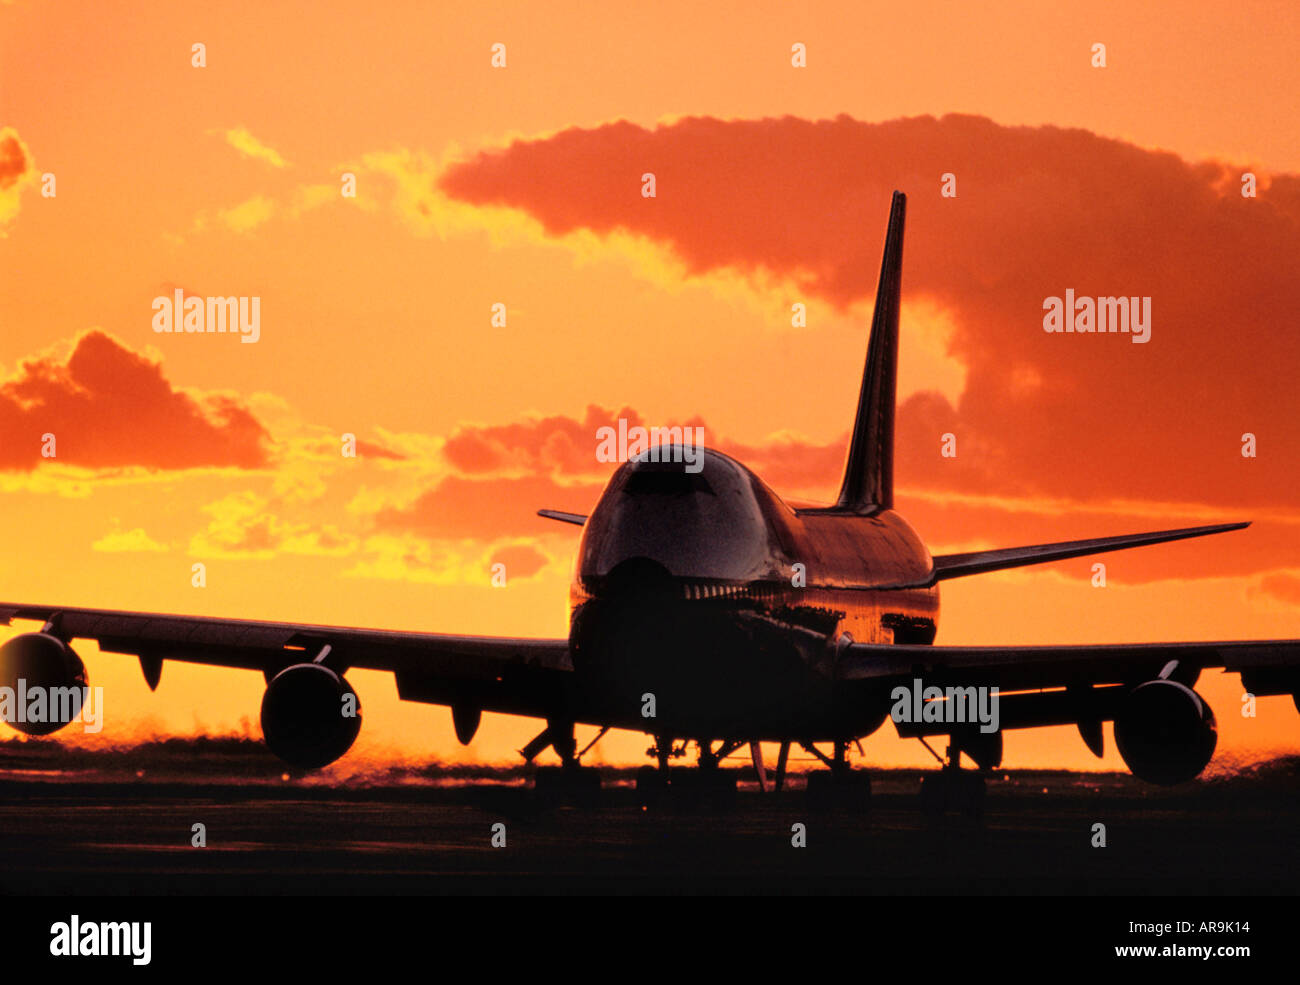 Boeing 747 jumbo jet on the runway with an golden orange sky at sunset sunrise dusk showing jet thrust exhaust pollution clouds Stock Photo